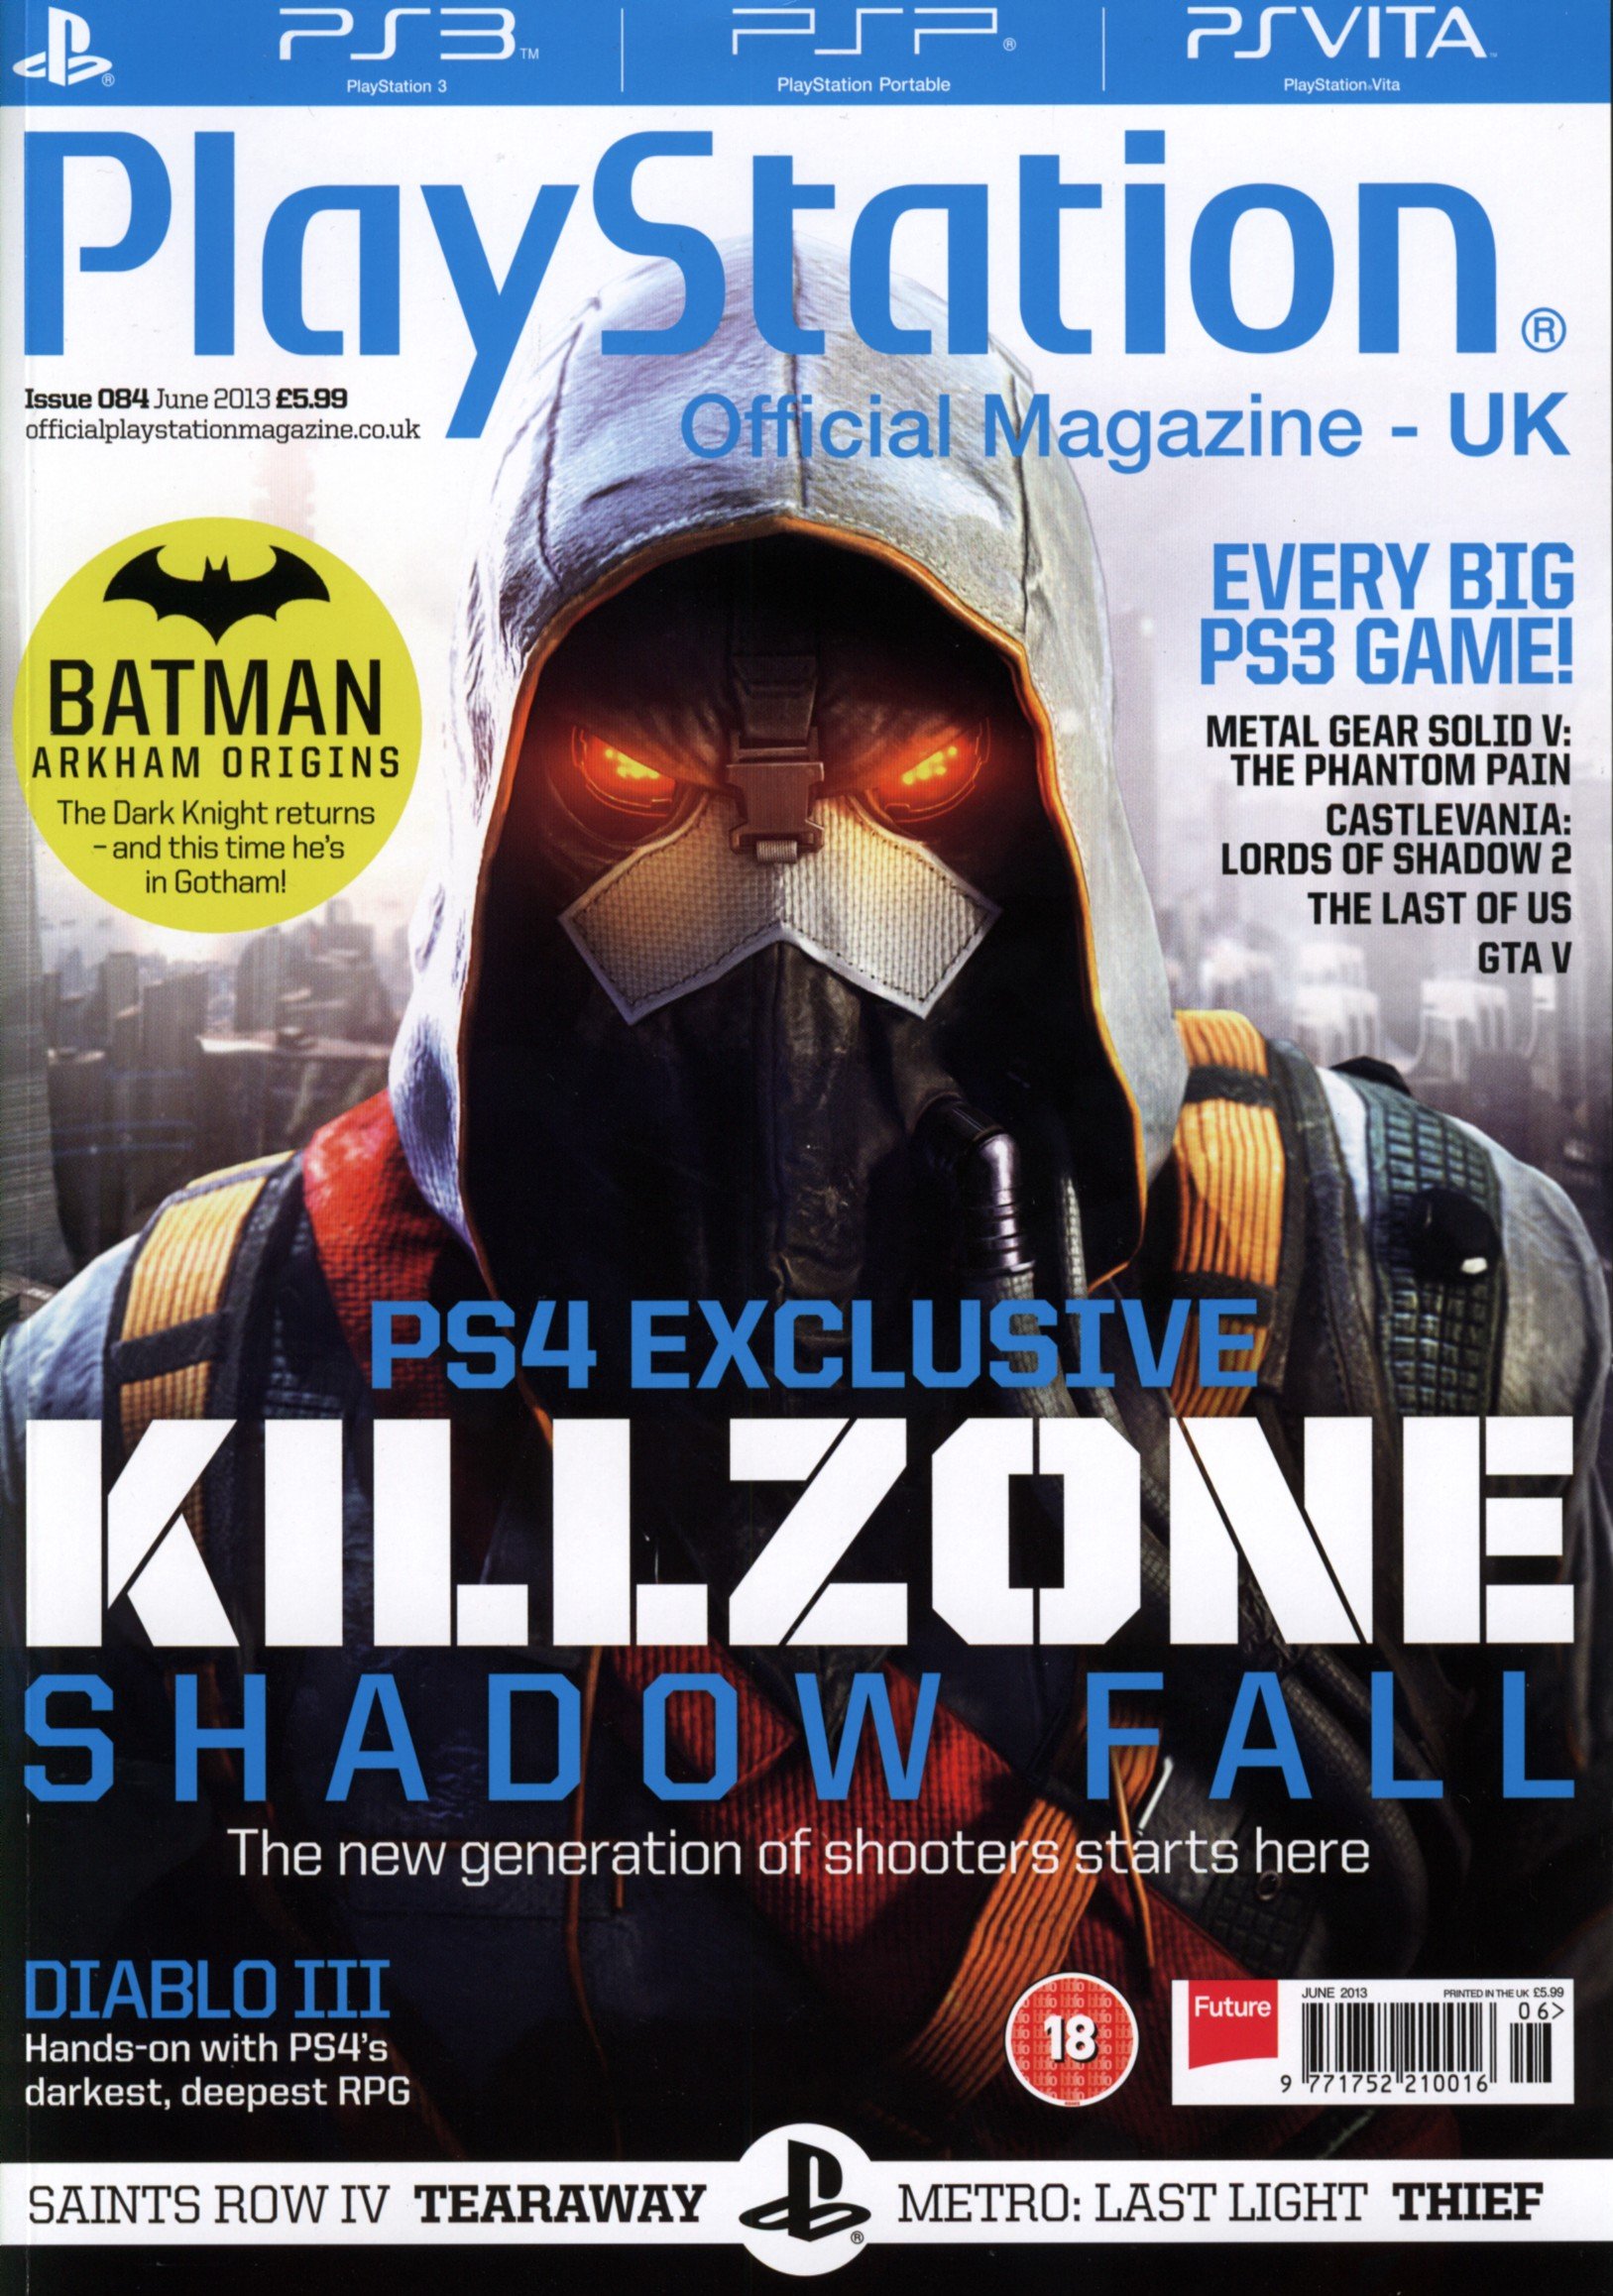 Playstation The Official Magazine Issue 84 Magazines from the Past | Fandom